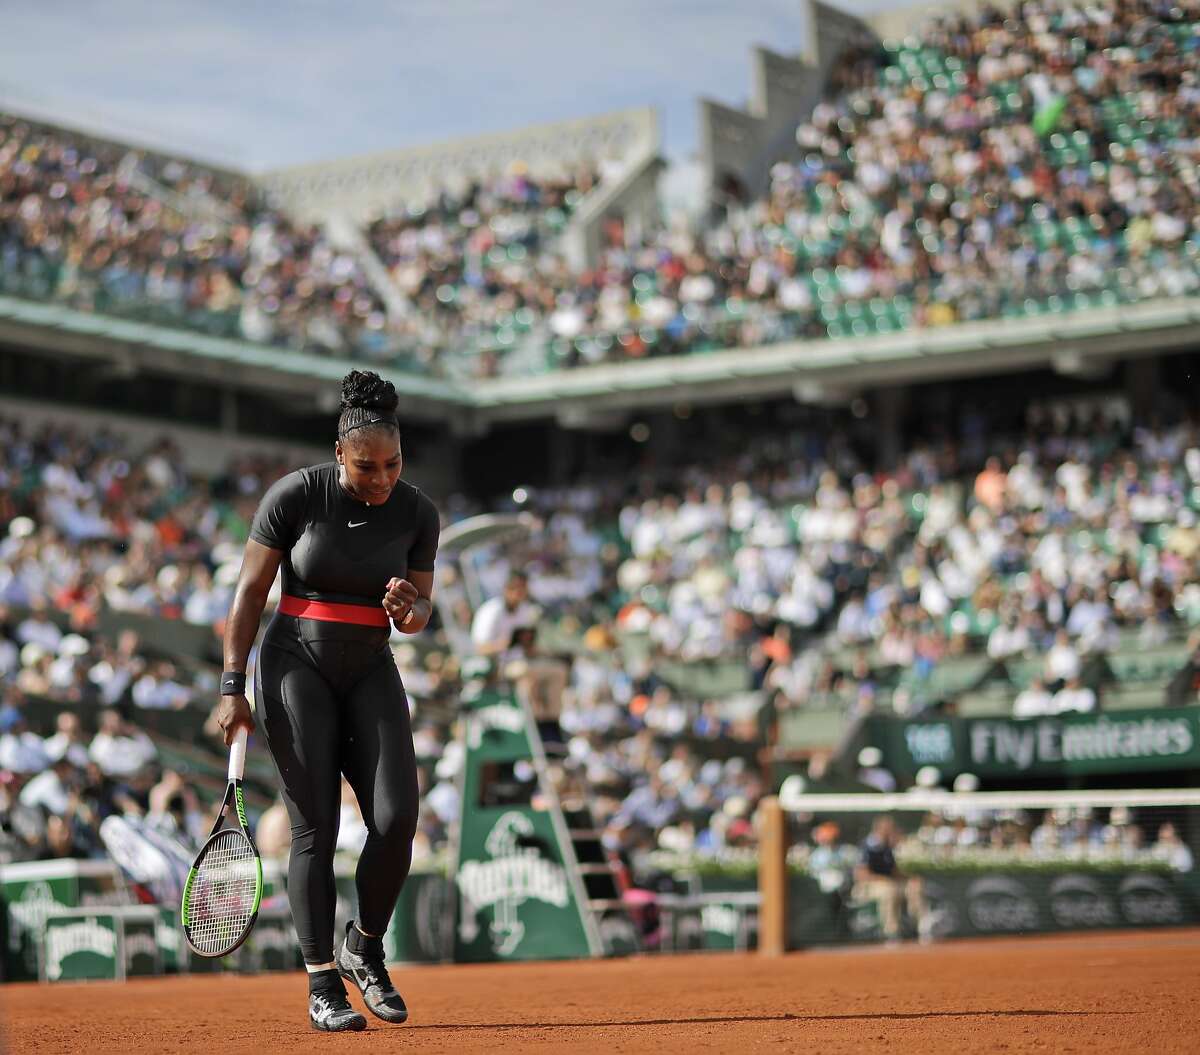 Serena Williams of the U.S. clenches her fist after scoring a point against Krystina Pliskova of the Czech Republic during their first round match of the French Open tennis tournament at the Roland Garros stadium in Paris, France, Tuesday, May 29, 2018. (AP Photo/Alessandra Tarantino)